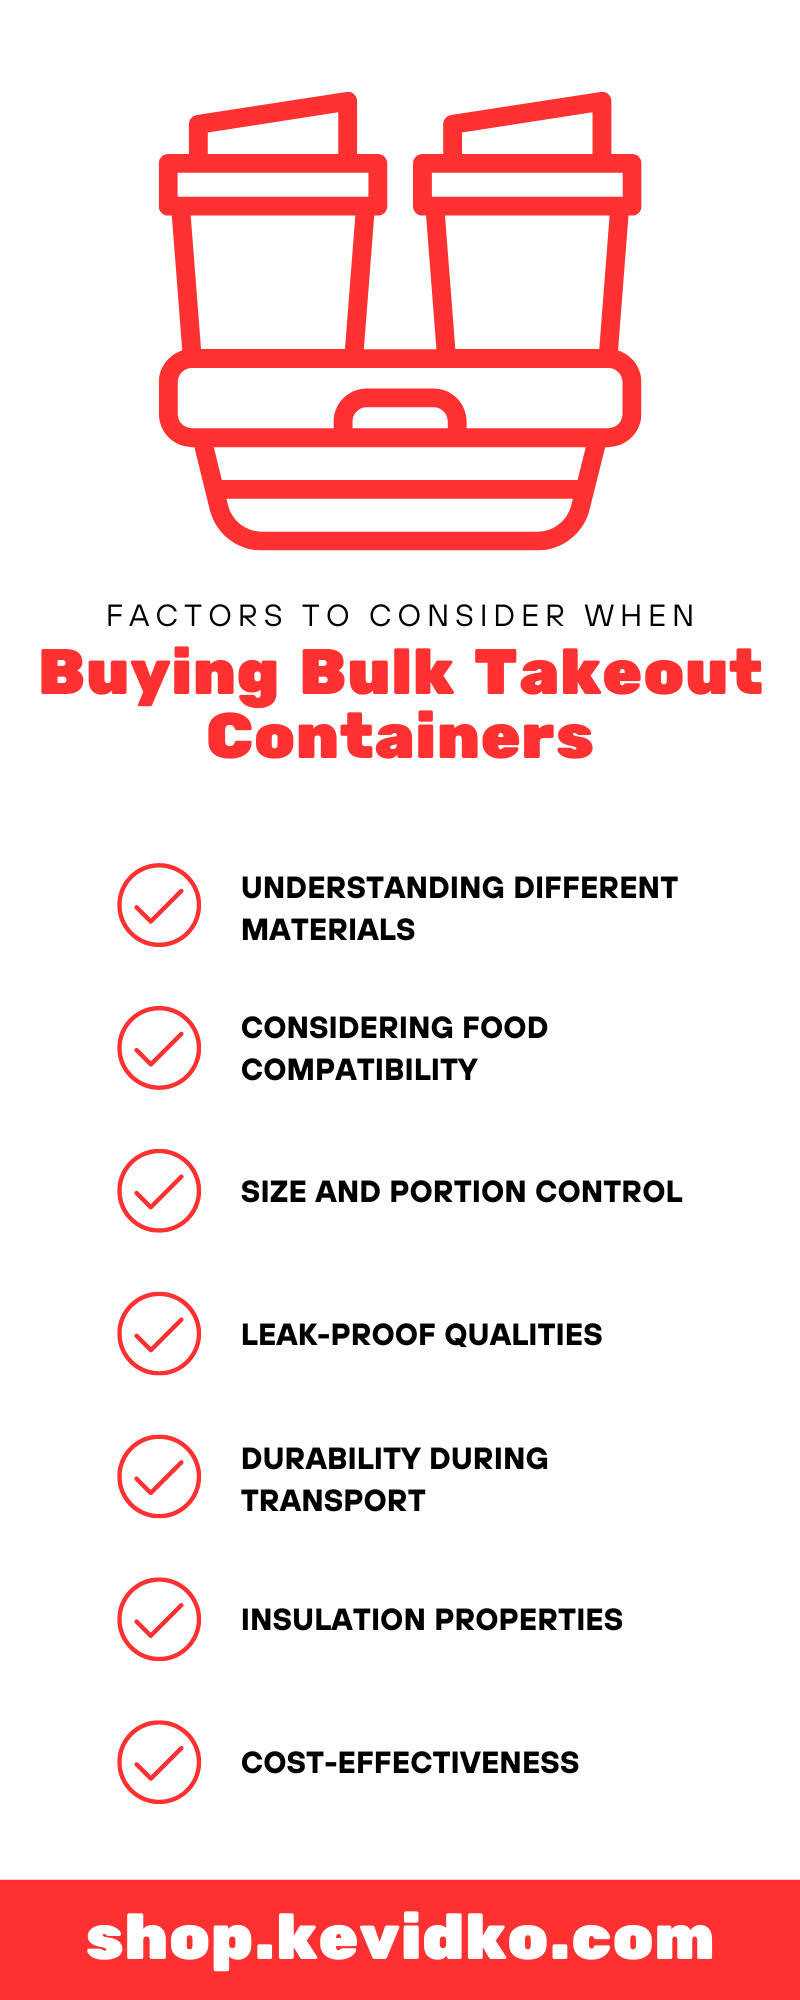 Factors To Consider When Buying Bulk Takeout Containers